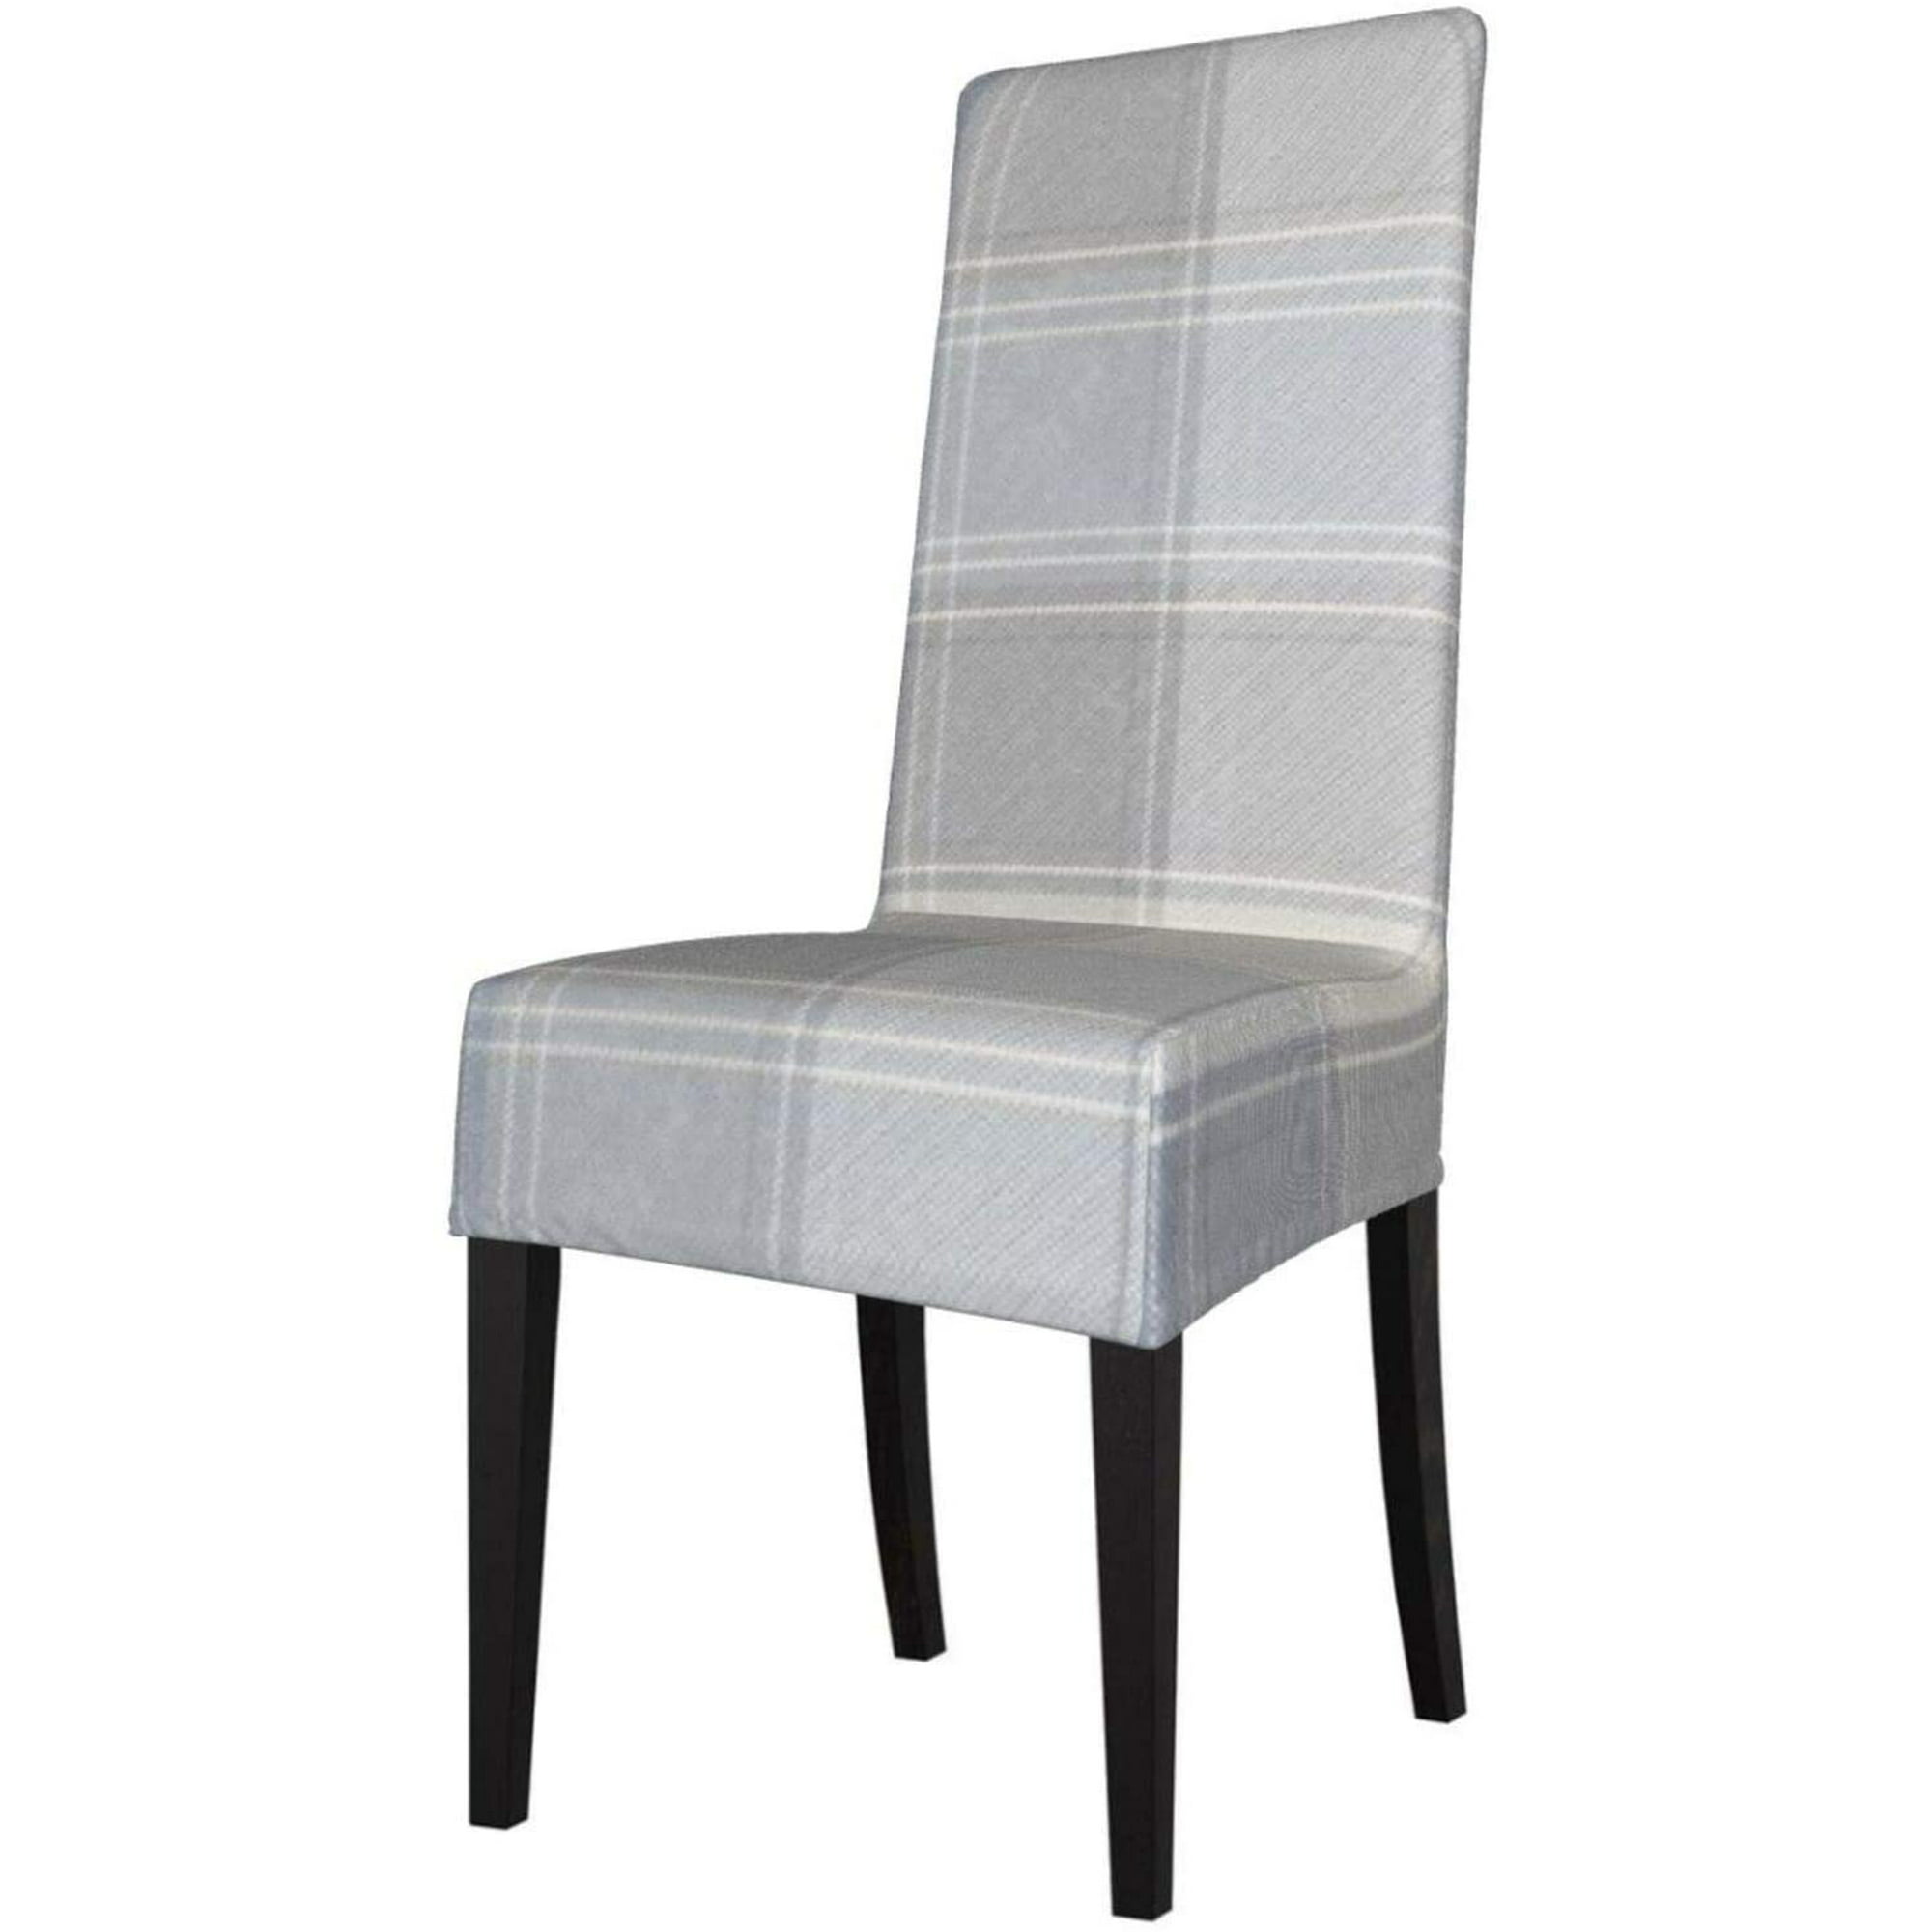 Dining Chair Cover Stretch, Denim Dining Chair Covers